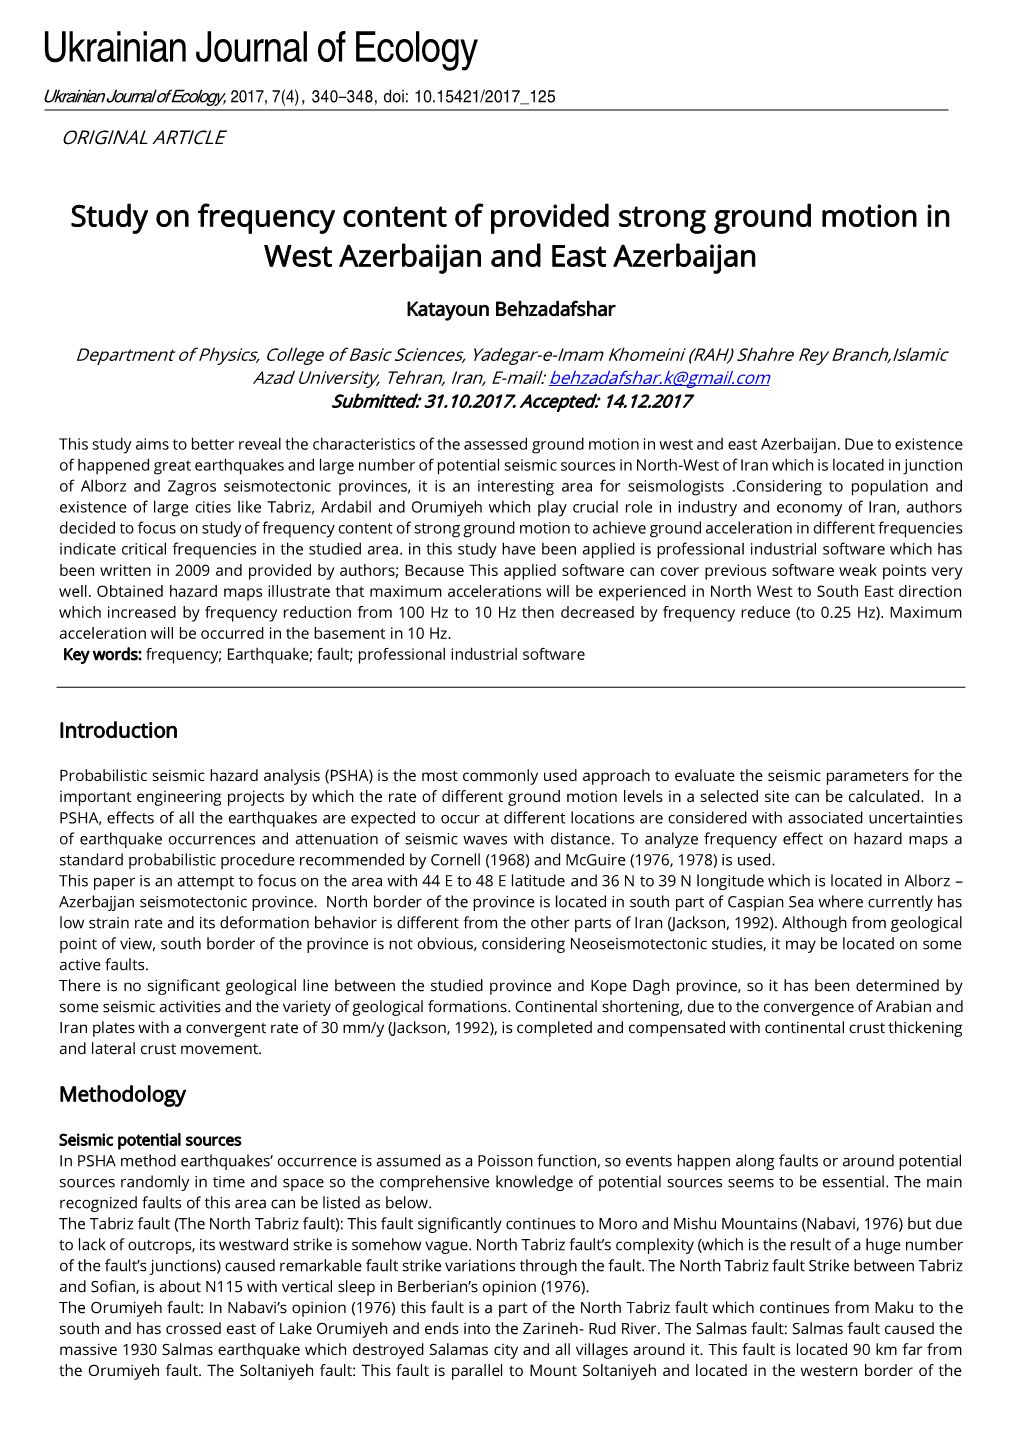 Study on Frequency Content of Provided Strong Ground Motion in West Azerbaijan and East Azerbaijan